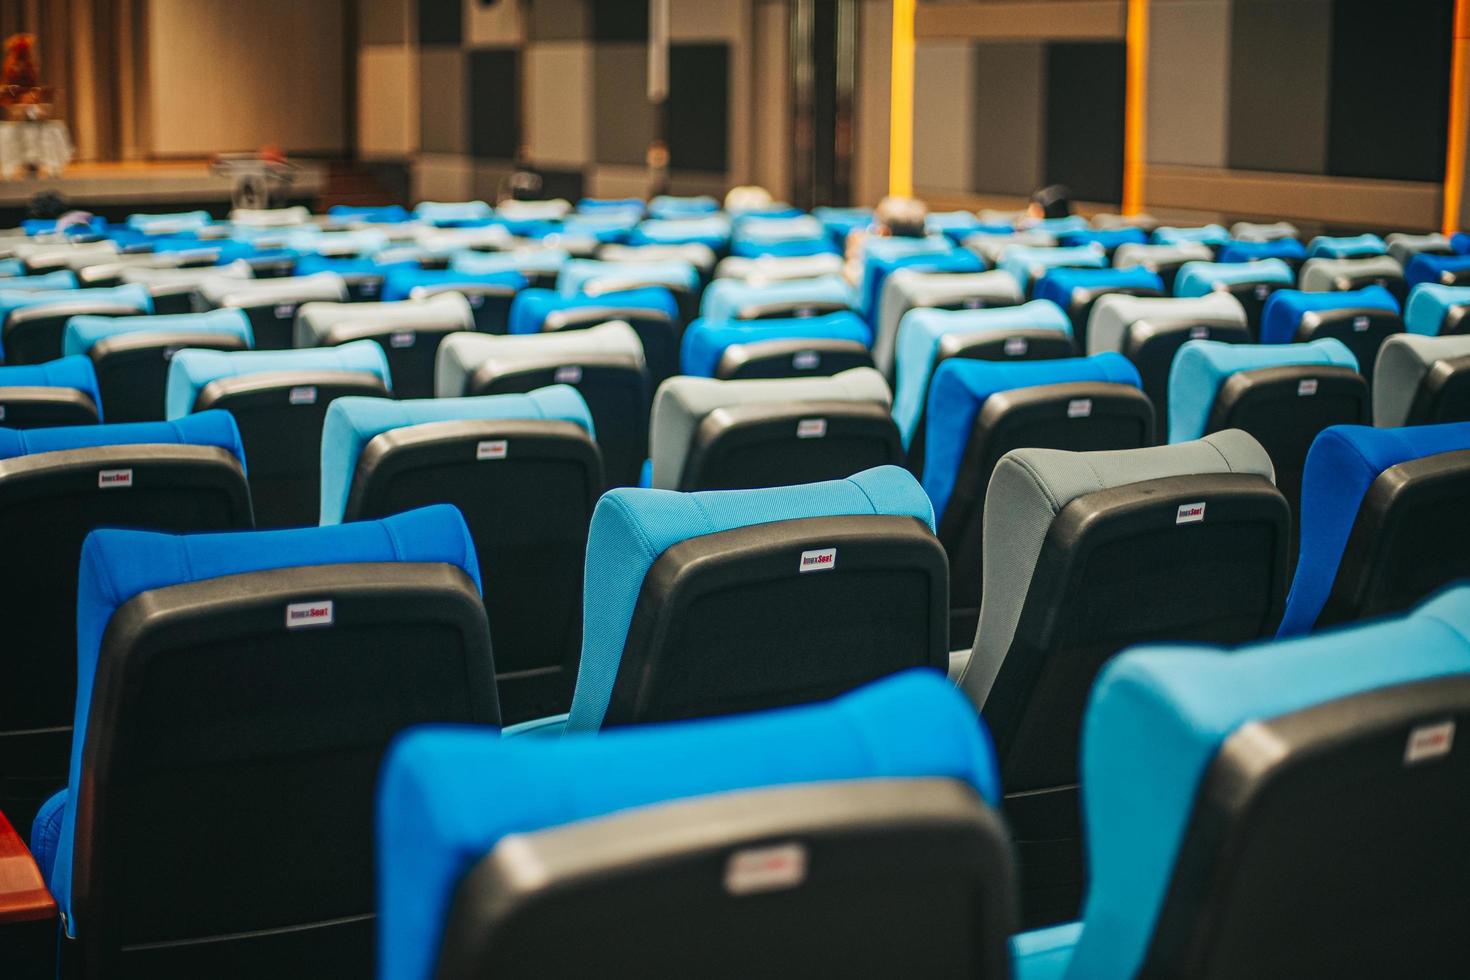 Empty blue cinema seats, chairs. Perspective view photo